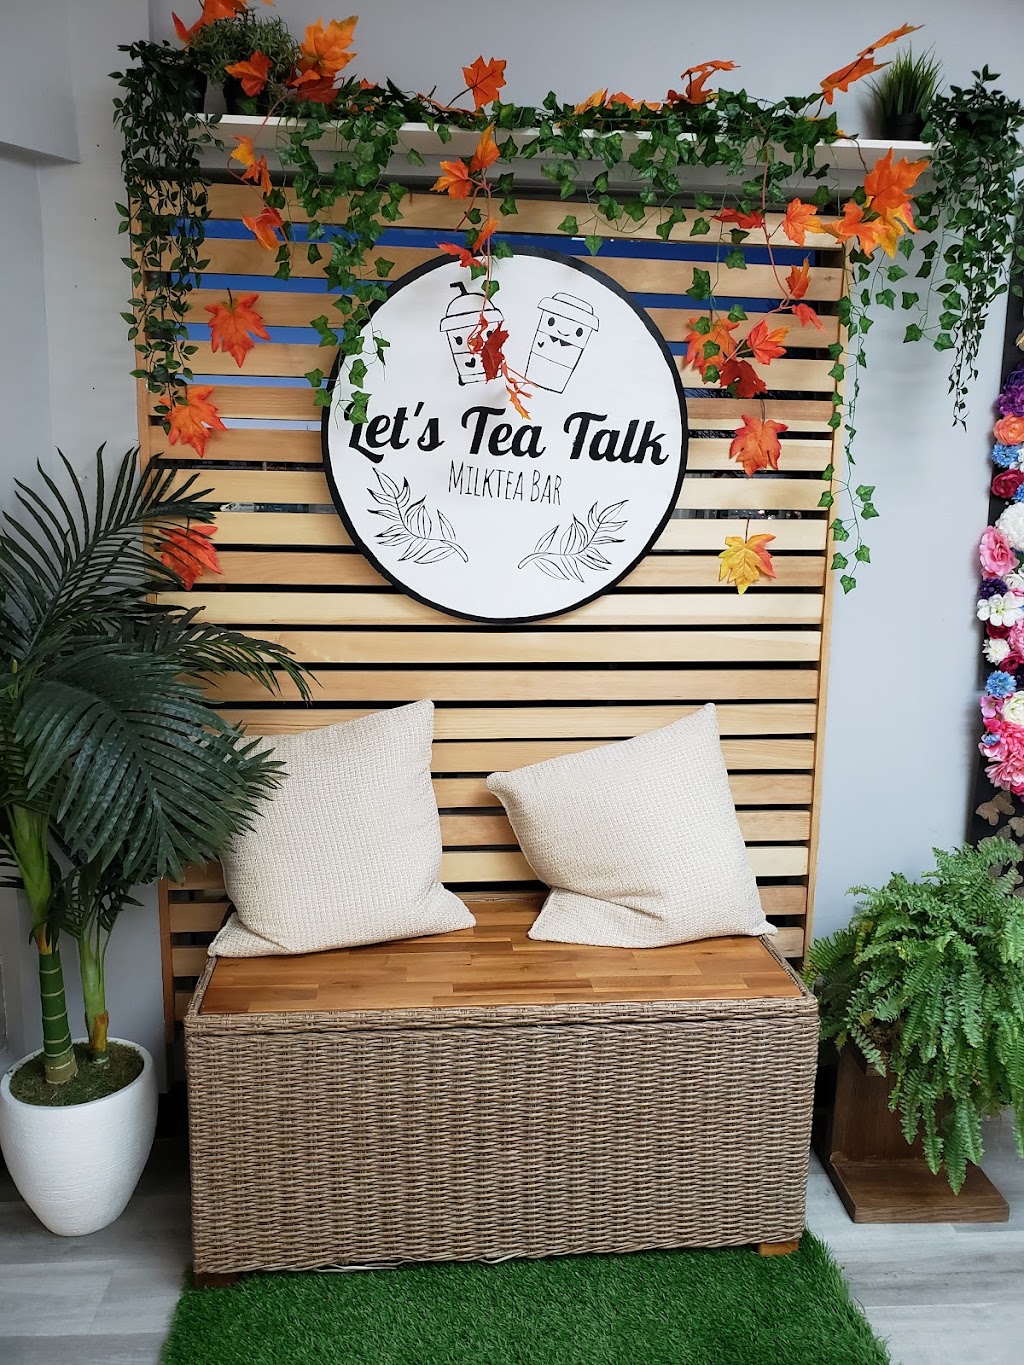 Lets Tea Talk | 7121 50 Ave, Red Deer, AB T4N 4E4, Canada | Phone: (403) 341-4607